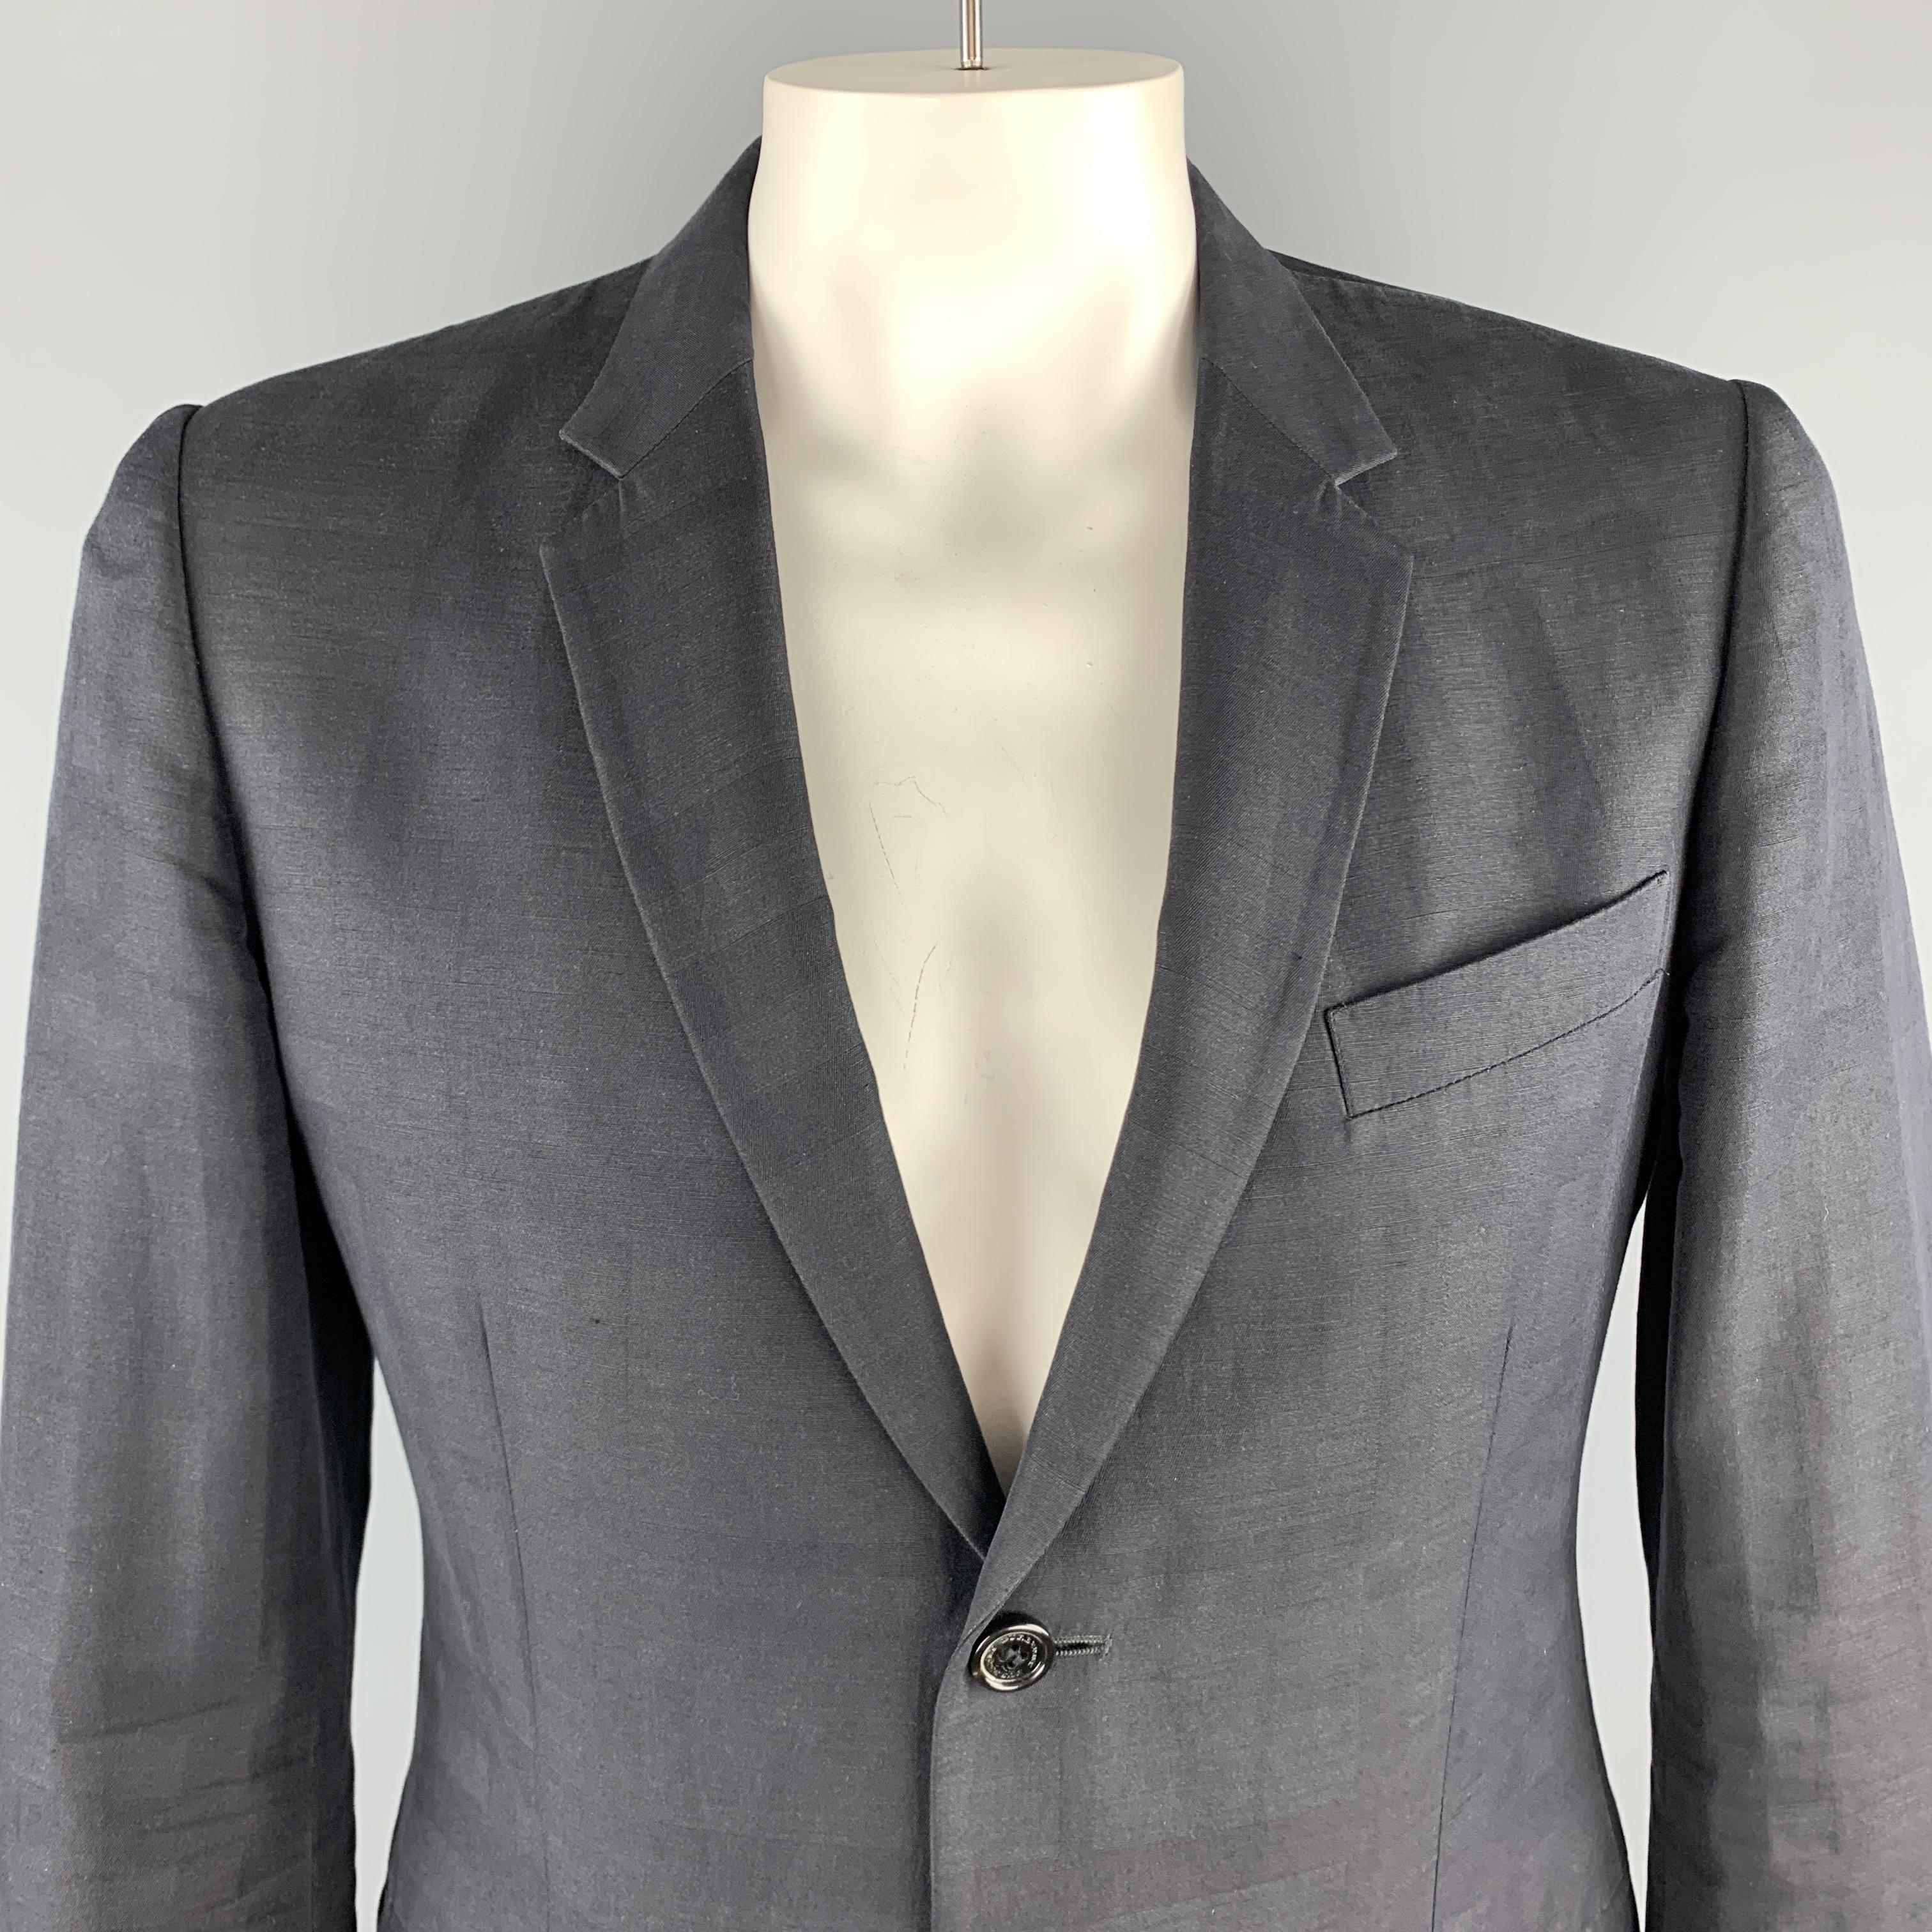 BURBERRY LONDON sport coat comes in black on black plaid cotton, linen, and  wool blend woven material with a notch lapel, single breasted, two button front, and double vented back. Made in Portugal.

Very Good Pre-Owned Condition. 
Marked: IT